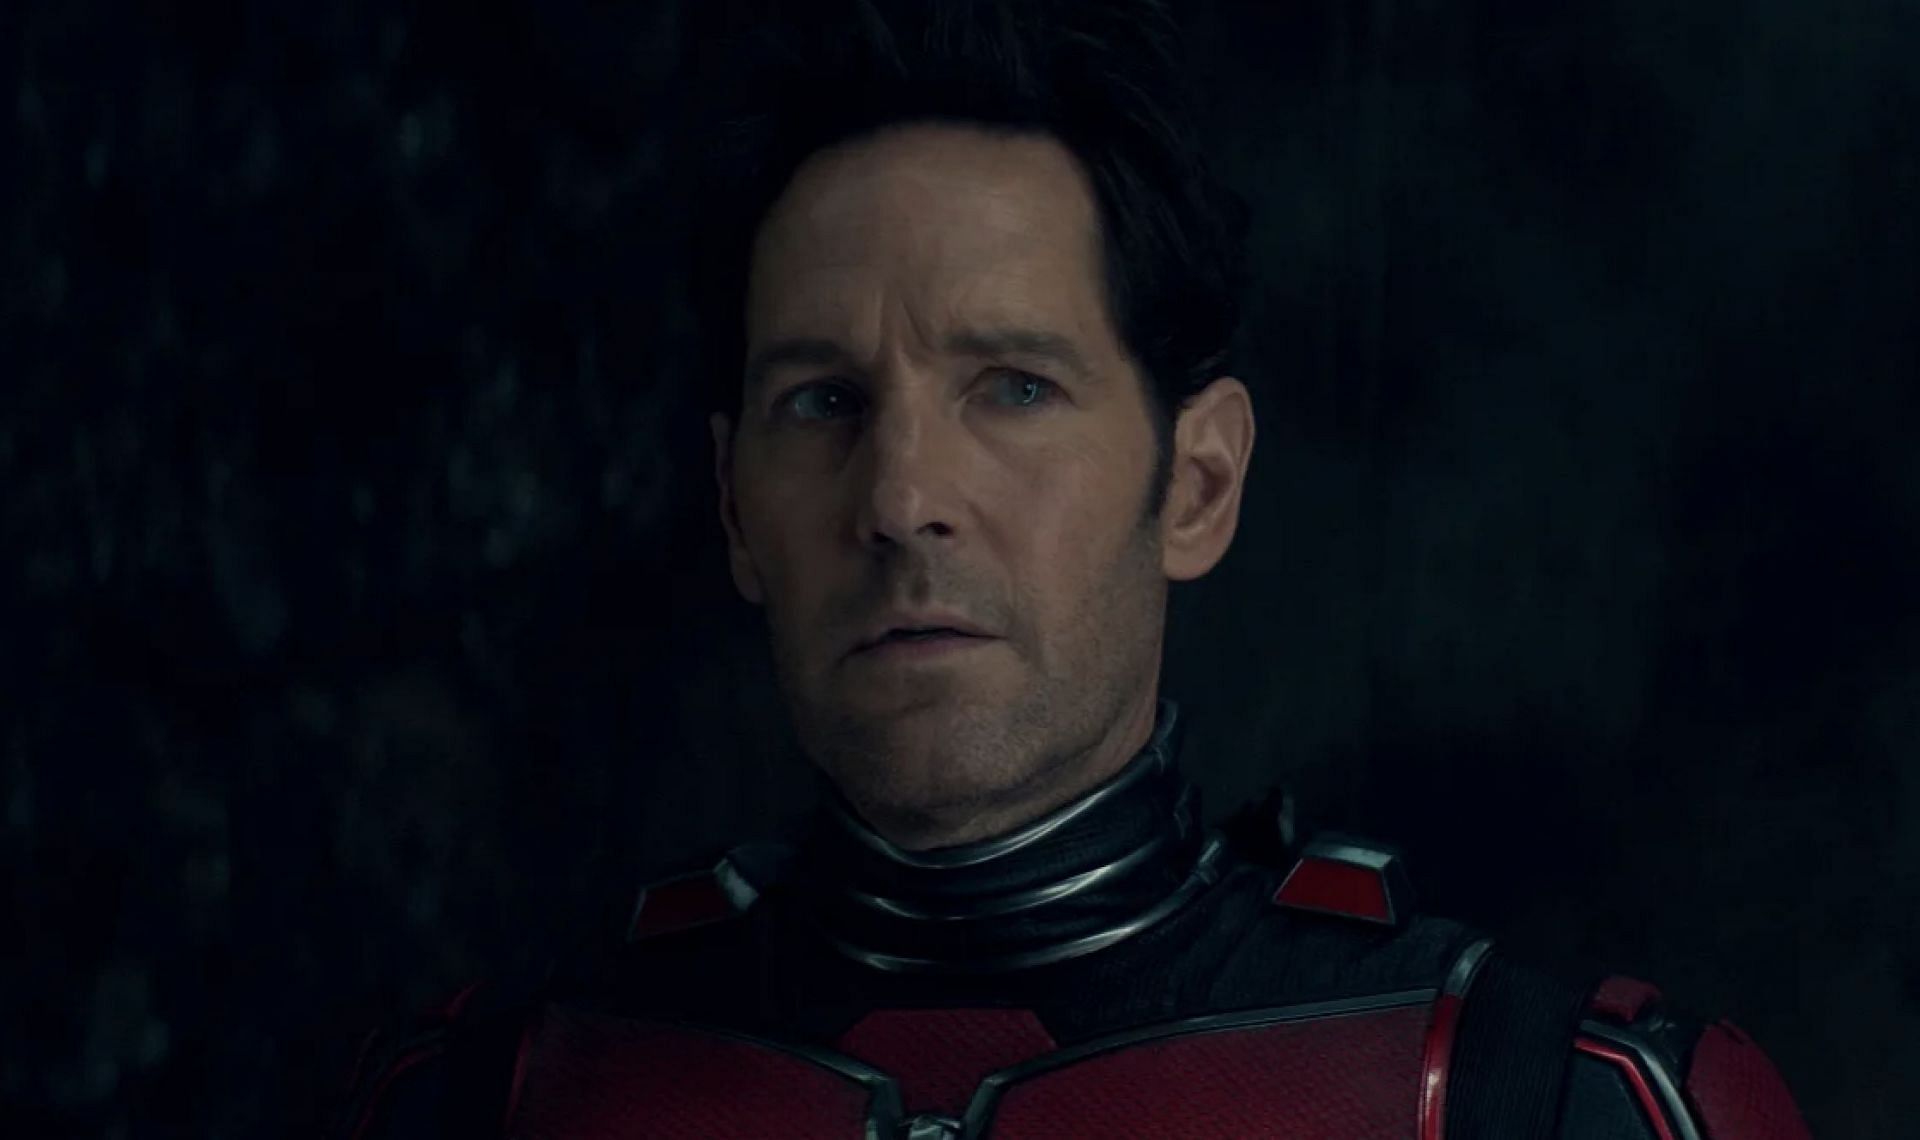 Ant-Man's unraveling: A sense of unease and paranoia (Image via Marvel Studios)